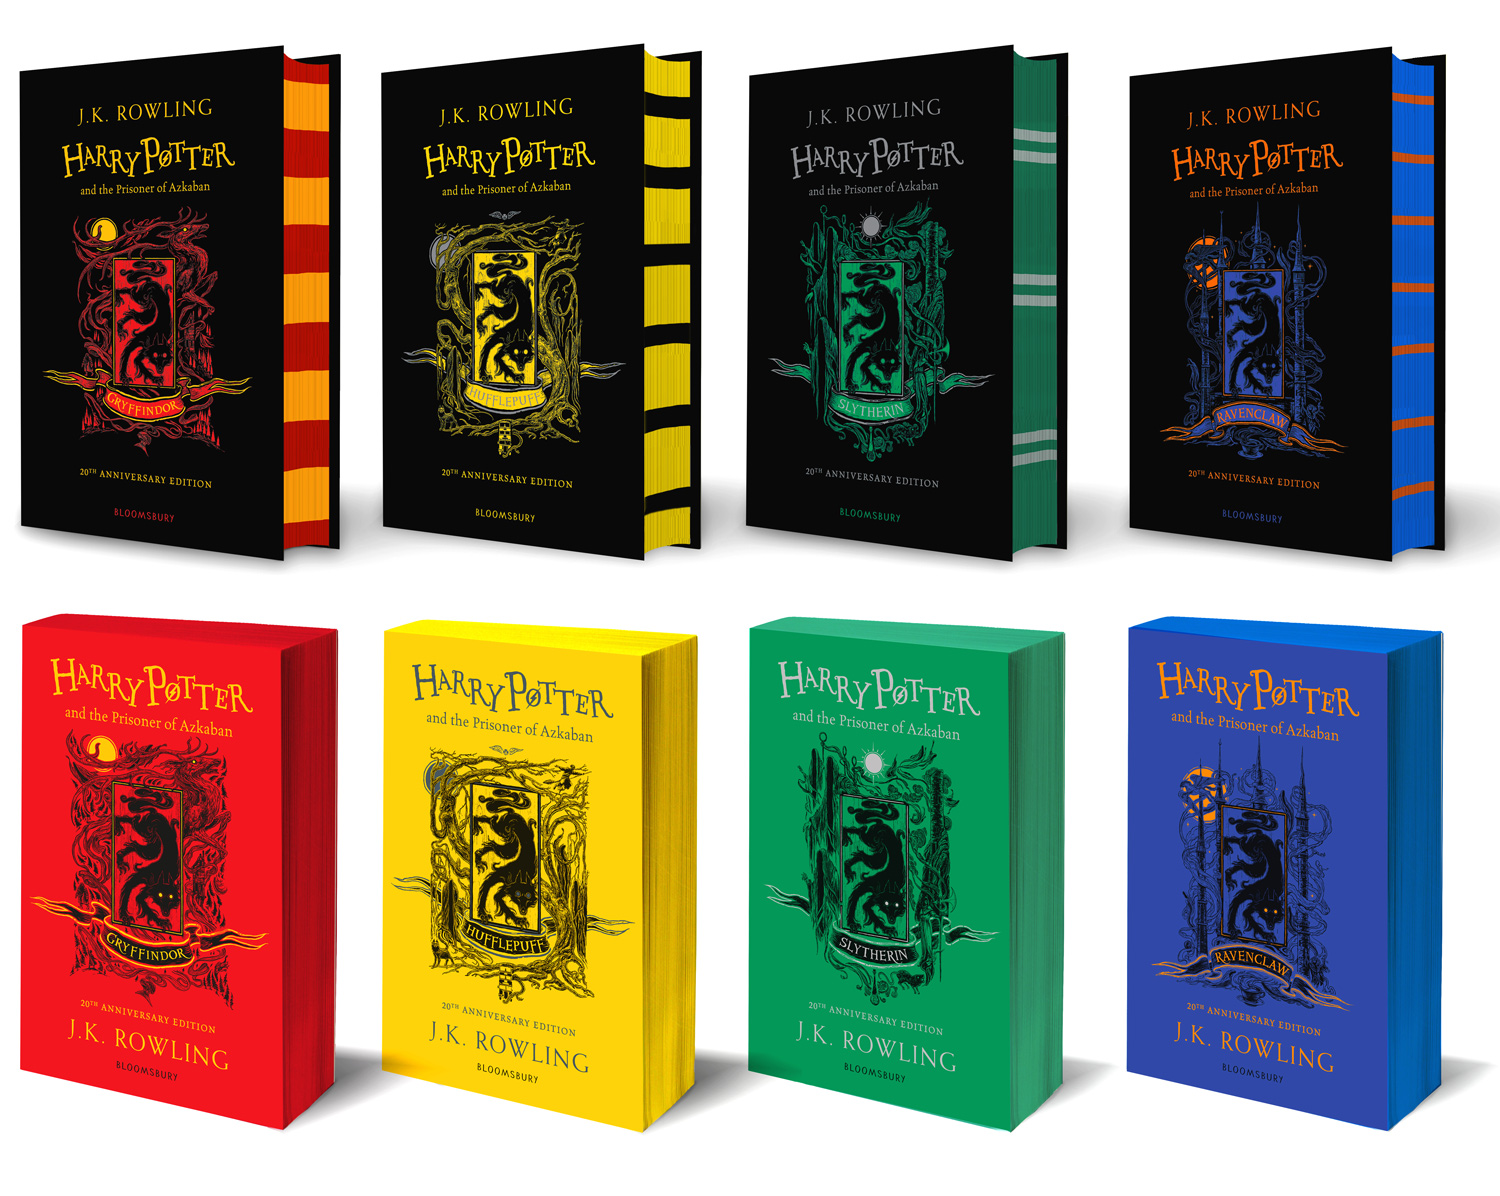 Harry Potter and the Prisoner of Azkaban House Editions